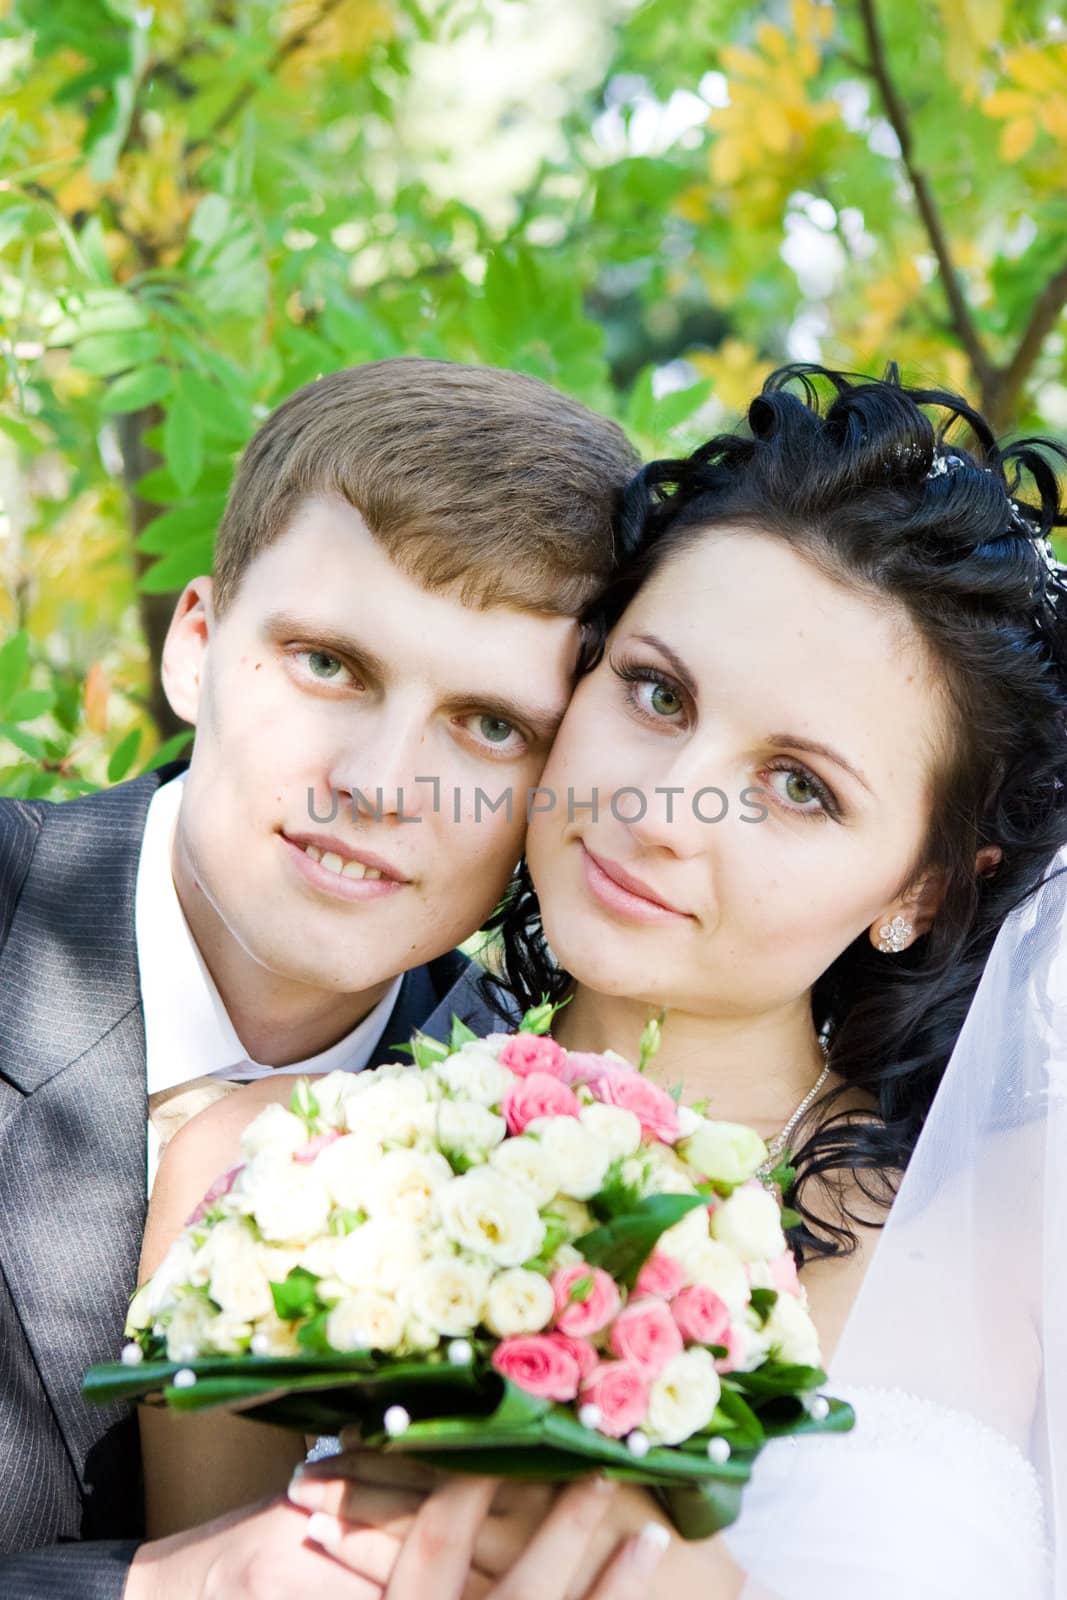 a portrait of the happy bride and groom  by vsurkov